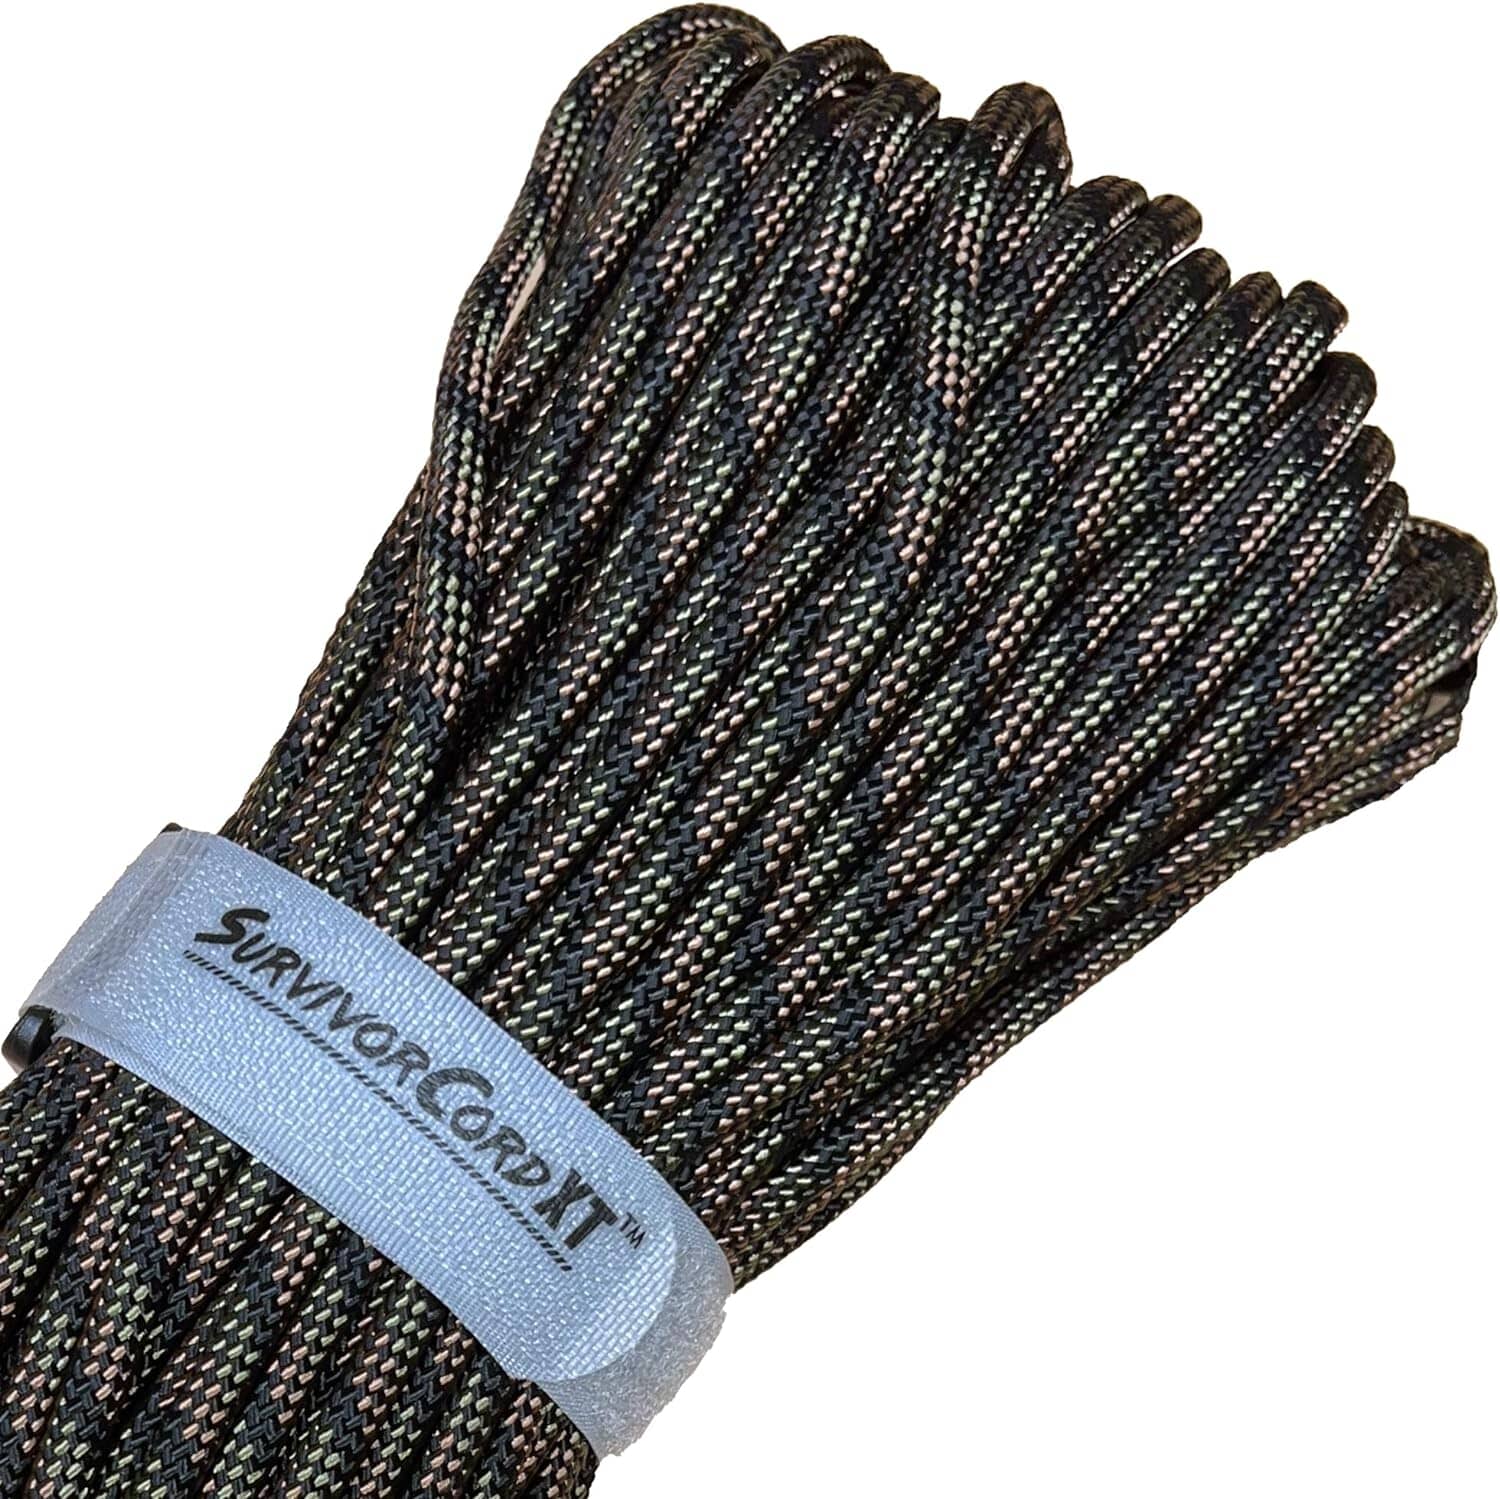 1,000 LB SurvivorCord XT Paracord, Made and Patented in The USA